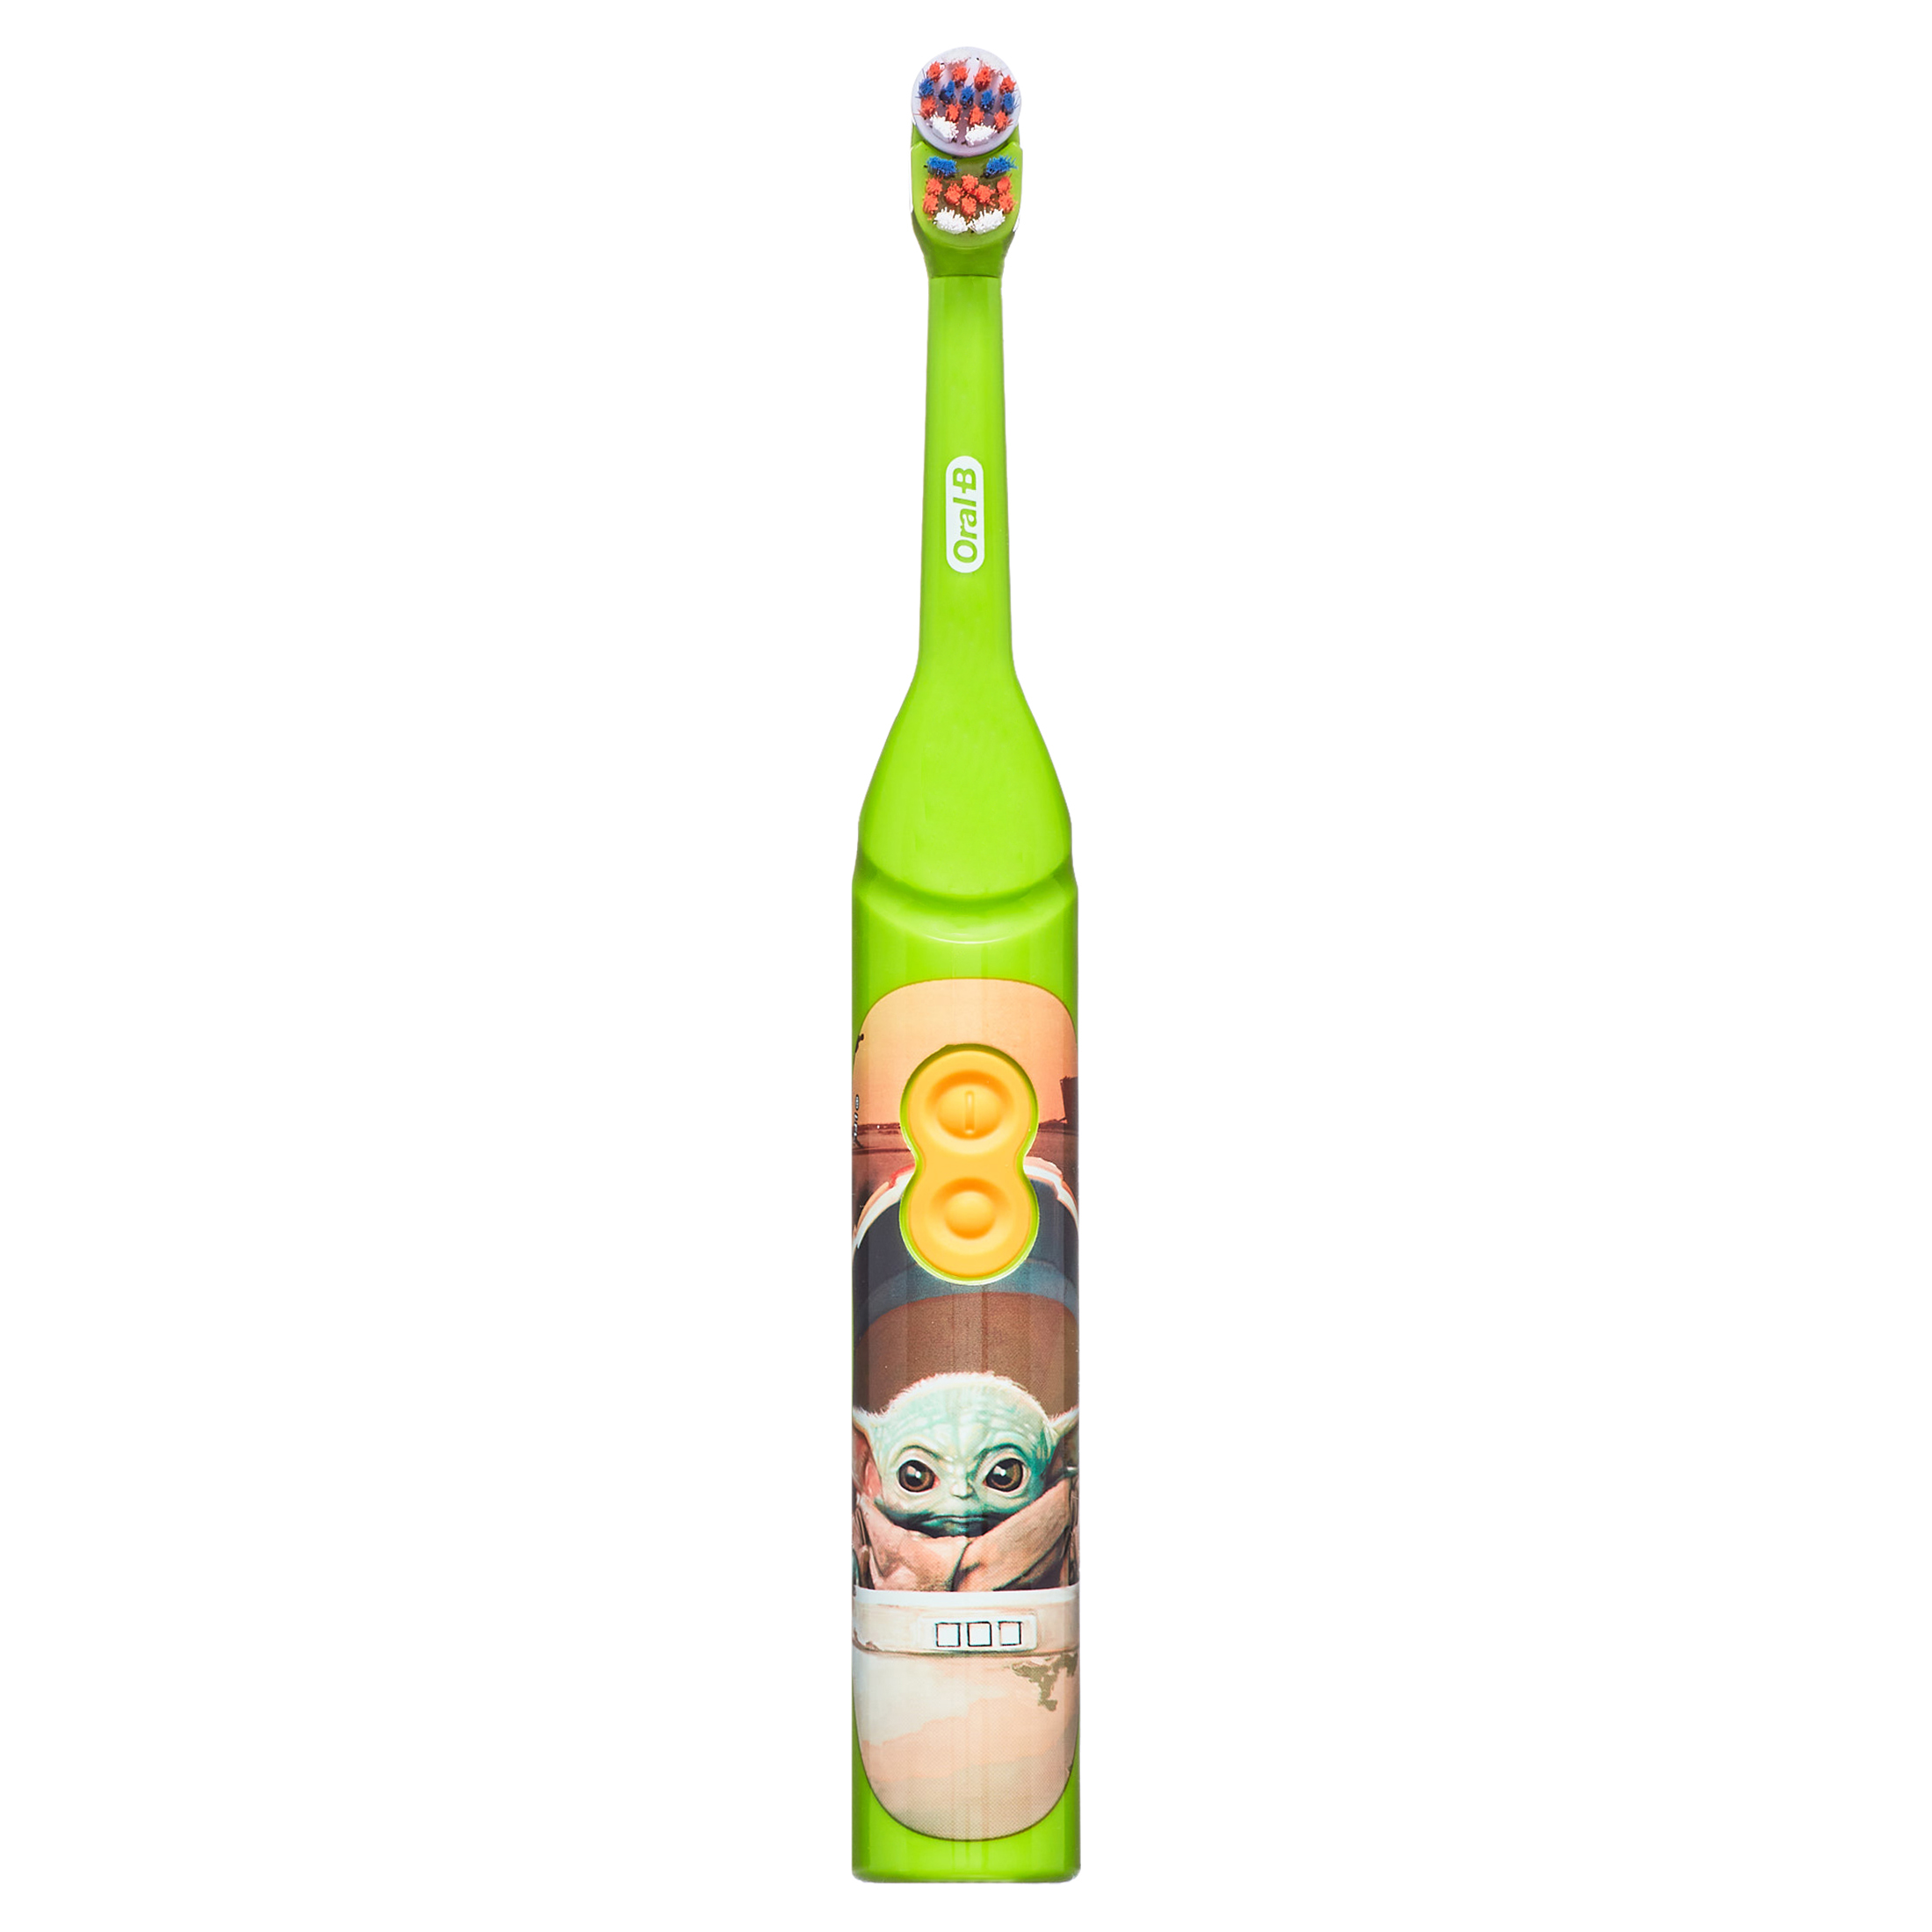 Oral-B Kid's Battery Toothbrush Featuring Lucasfilm's Mandalorian, Full Head, Soft, for Children 3+ - image 6 of 8